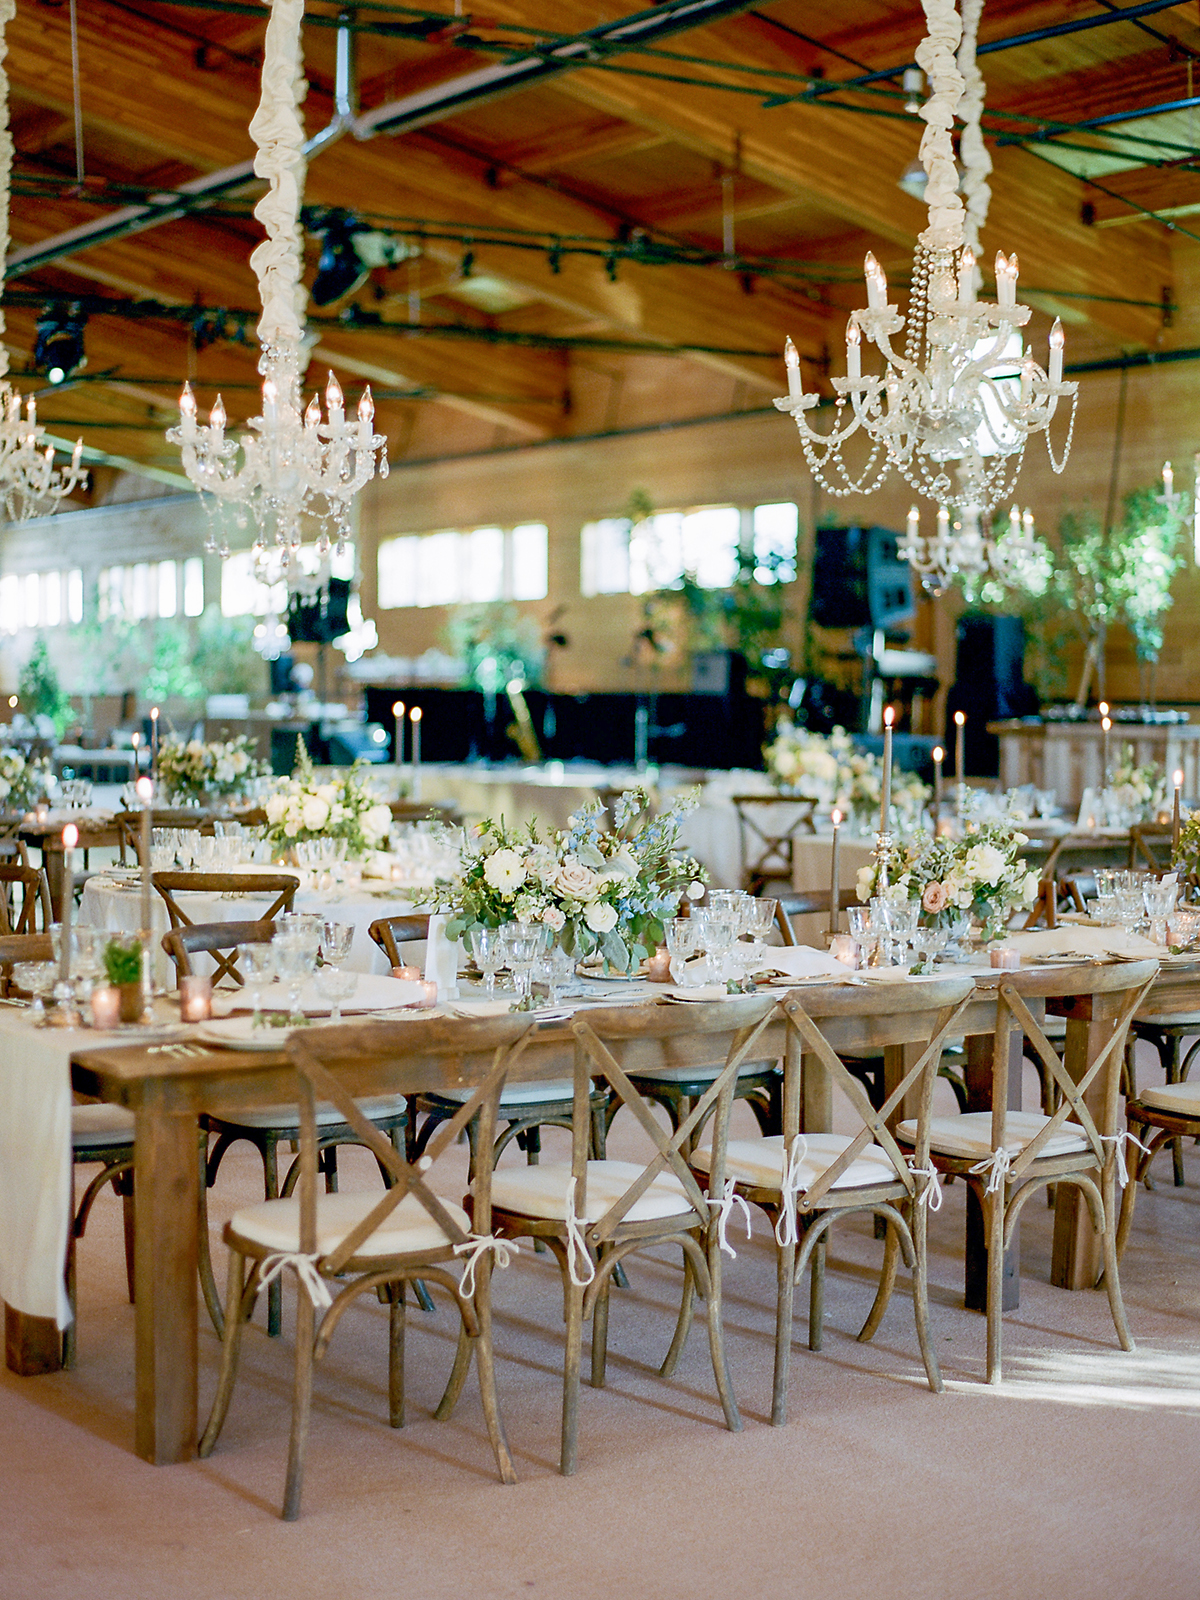 Chaparral Ranch Wedding with Lisa Vorce. Photos by Rachel Havel 